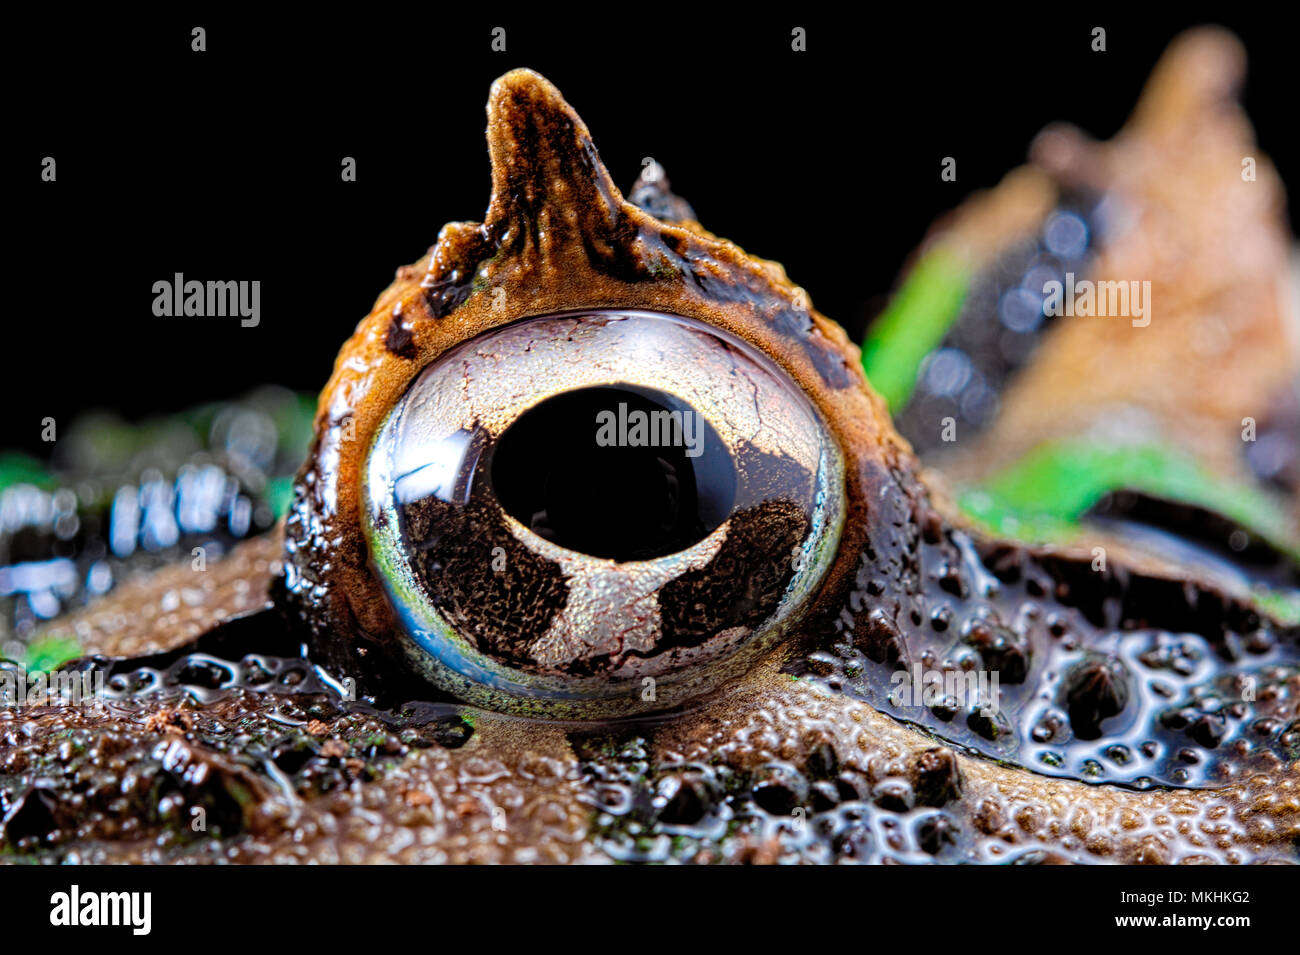 Chacoan horned frog or Pacman frog (Ceratophrys cranwelli) eye on black background Stock Photo